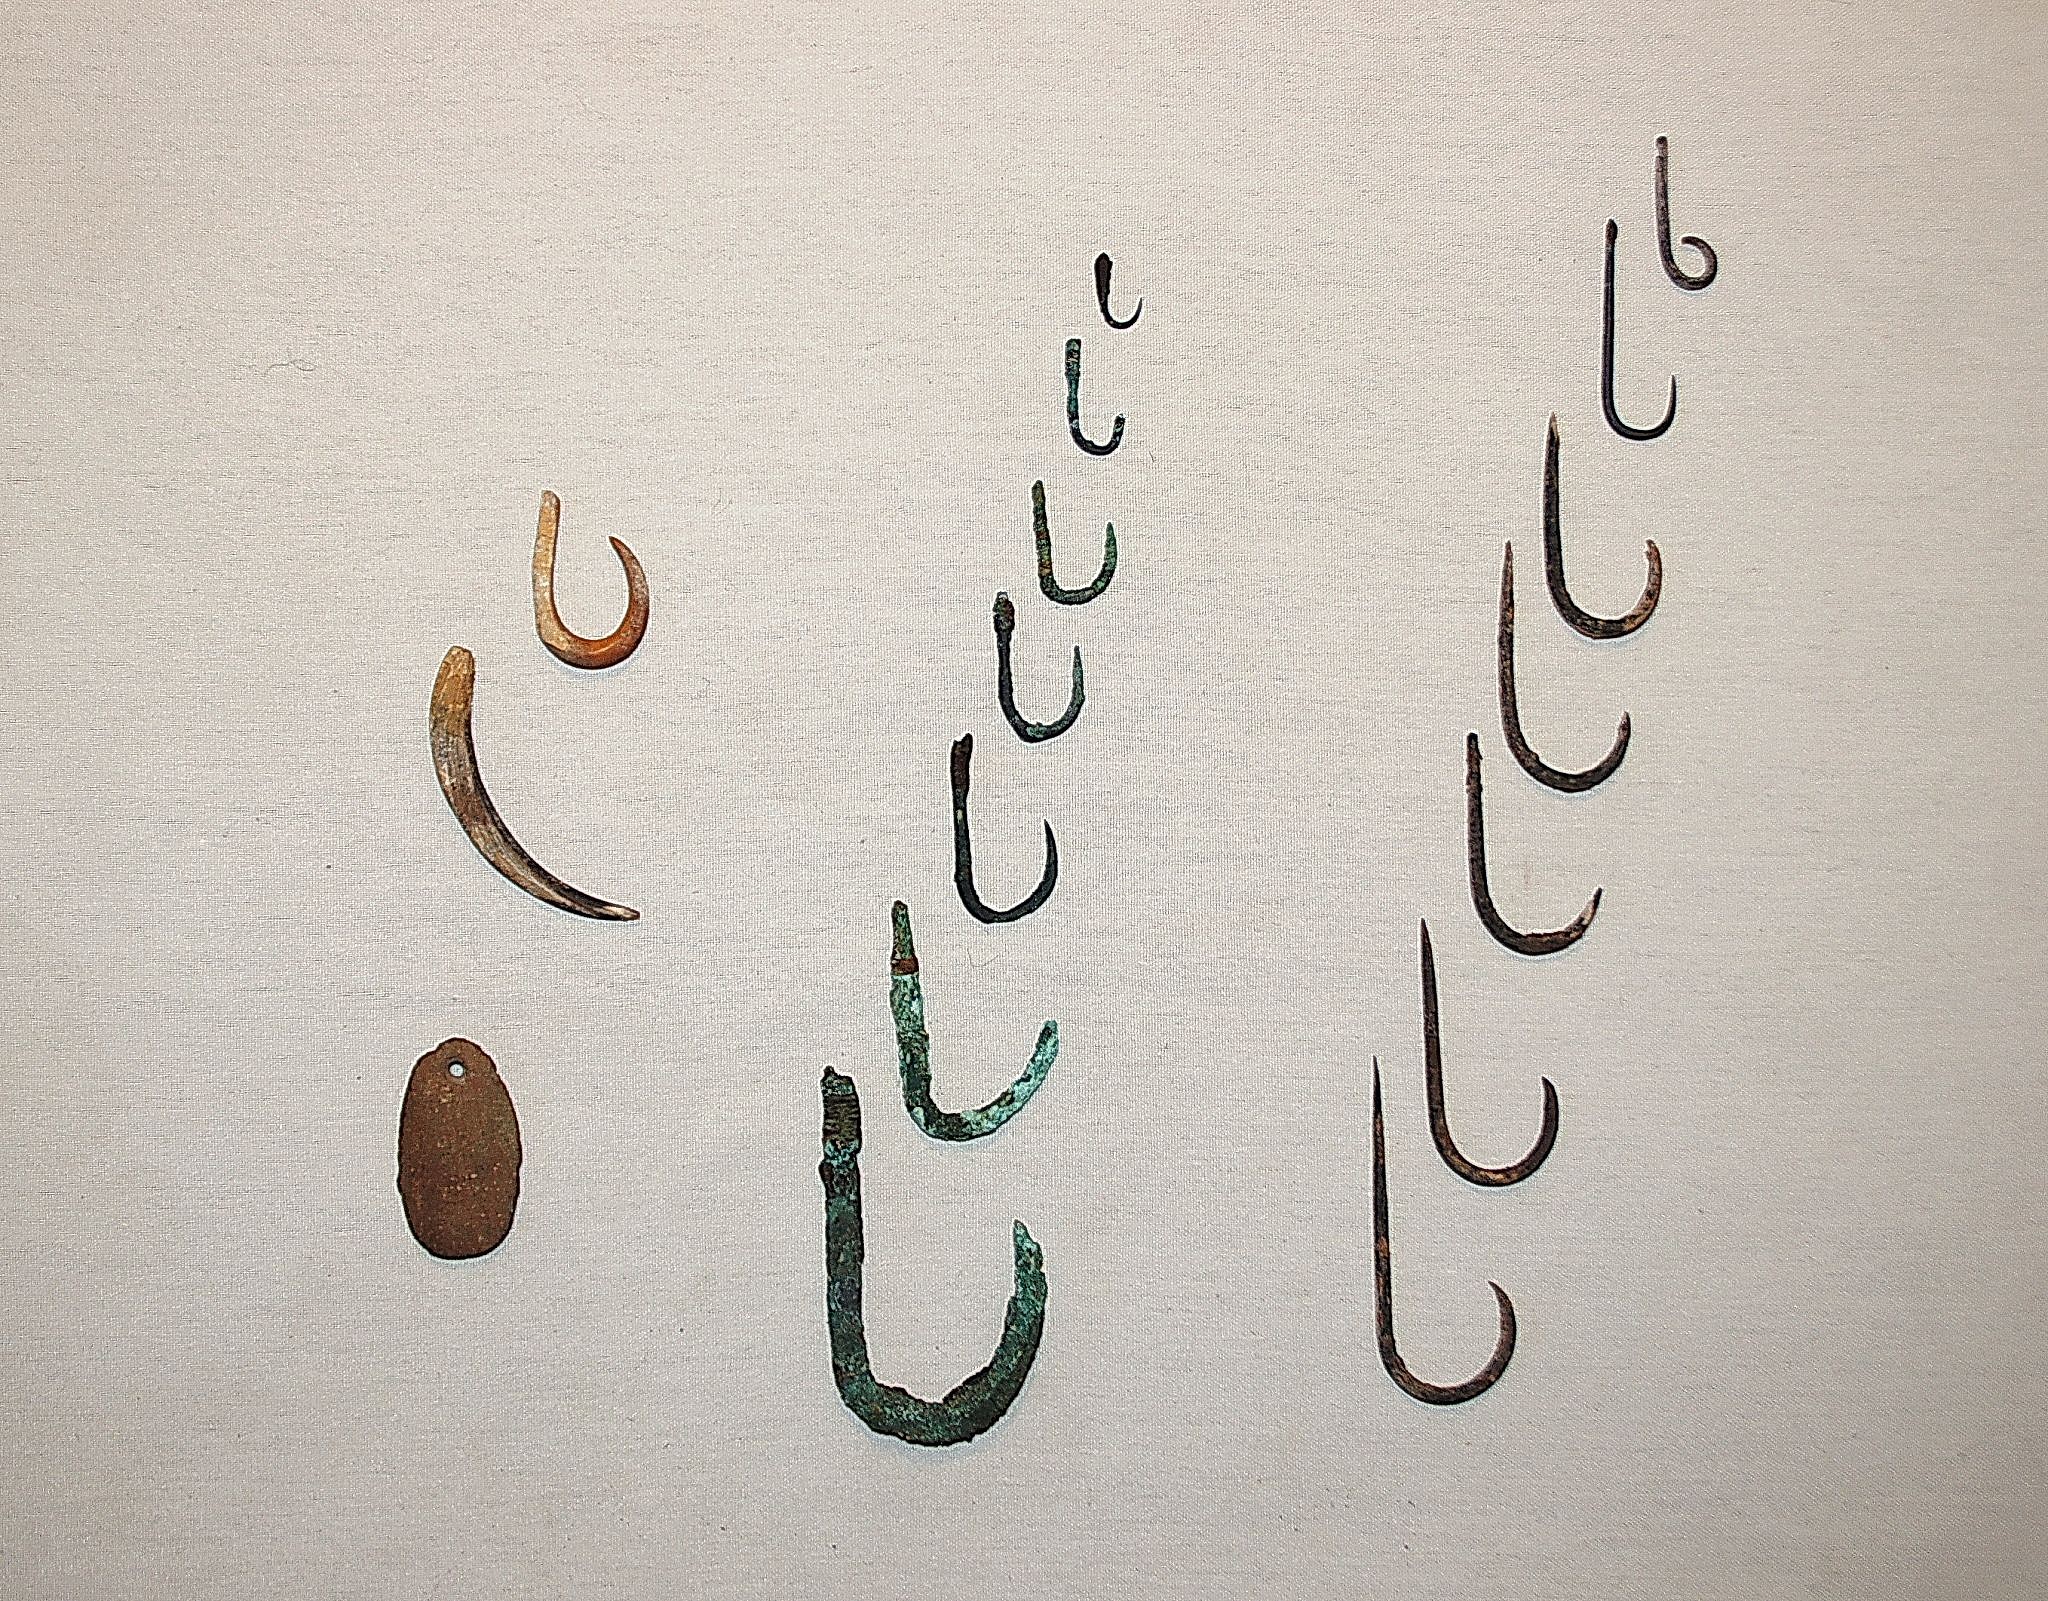 Chile, Early Fish Hooks Made of Shell, Copper and CatusThorn in Varying Sizes
These shell hooks are the most early and rare form of Pre-Colombian fish hook.  The copper hooks with straight shanks still have the original cotton line, which has been corroded.  The thorn hooks with straight shanks have a notch to secure a fishing line. The flat stone with a suspension hole was for sharpening the fishhook's points.
Media: Metal
Dimensions: Lengths vary:  1" - 2.75”
N6016